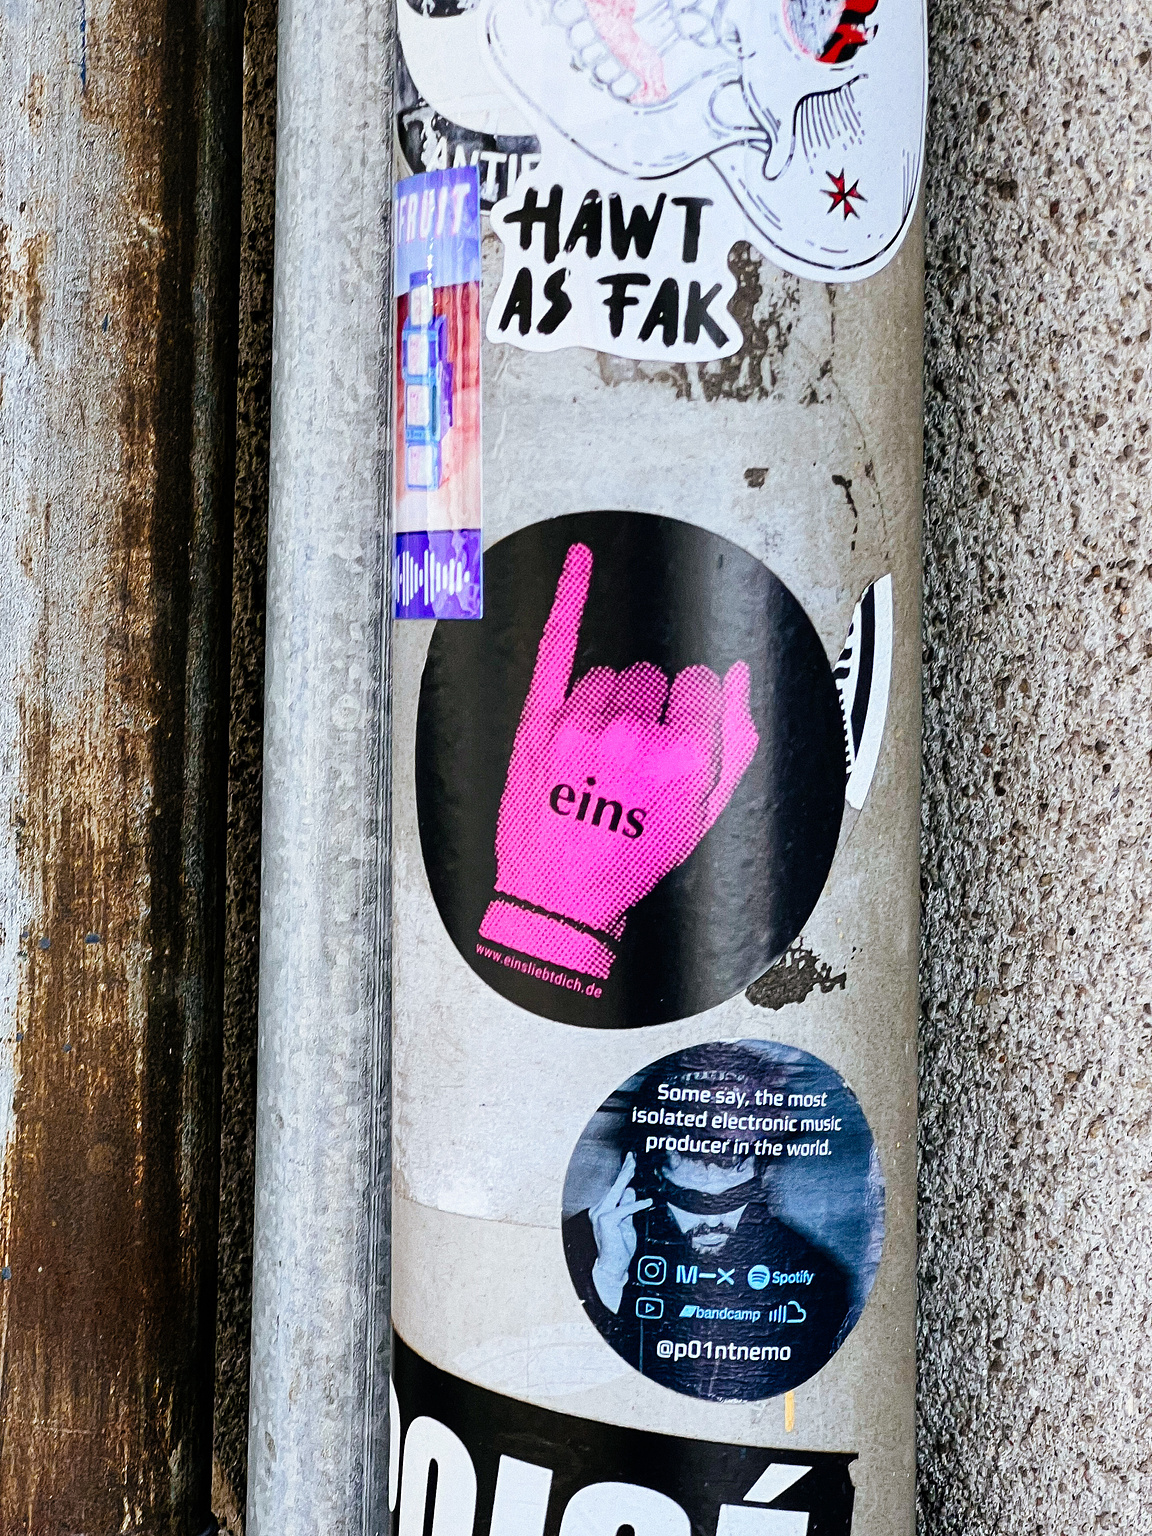 Various stickers are affixed to a pole, featuring graphics and text, including one with a pink hand and the word "eins."